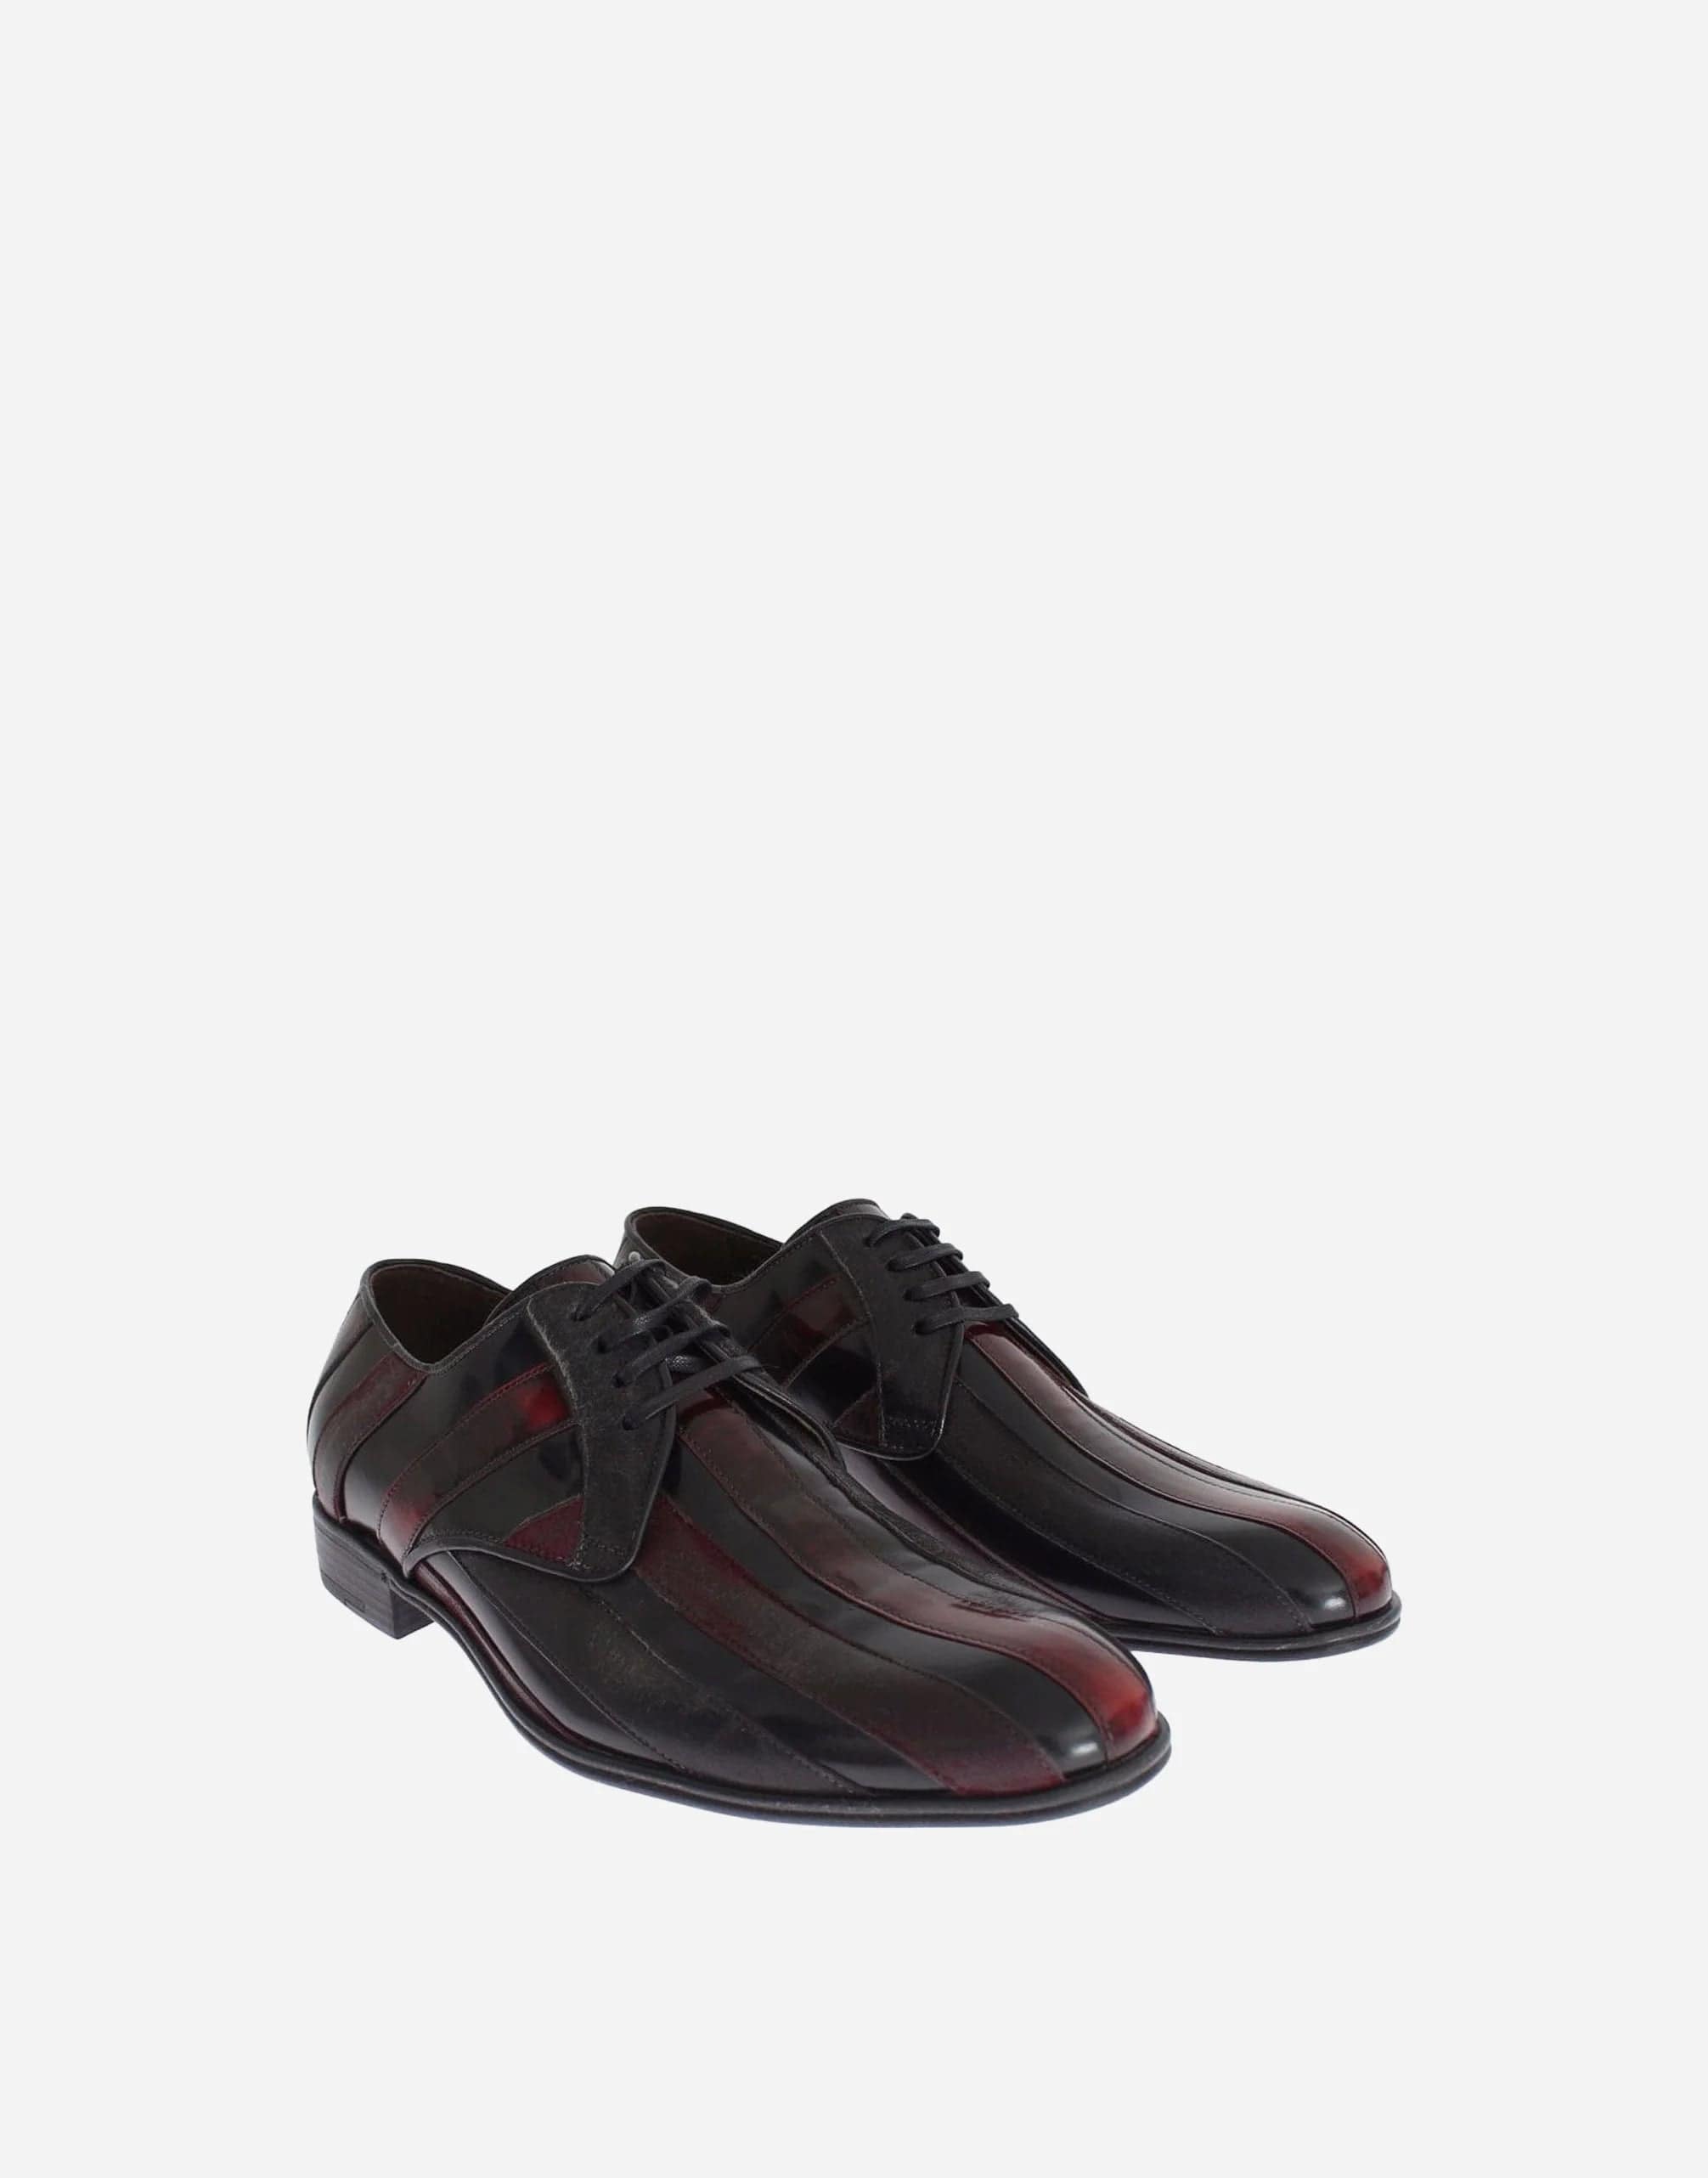 Dolce & Gabbana Striped Leather Formal Shoes